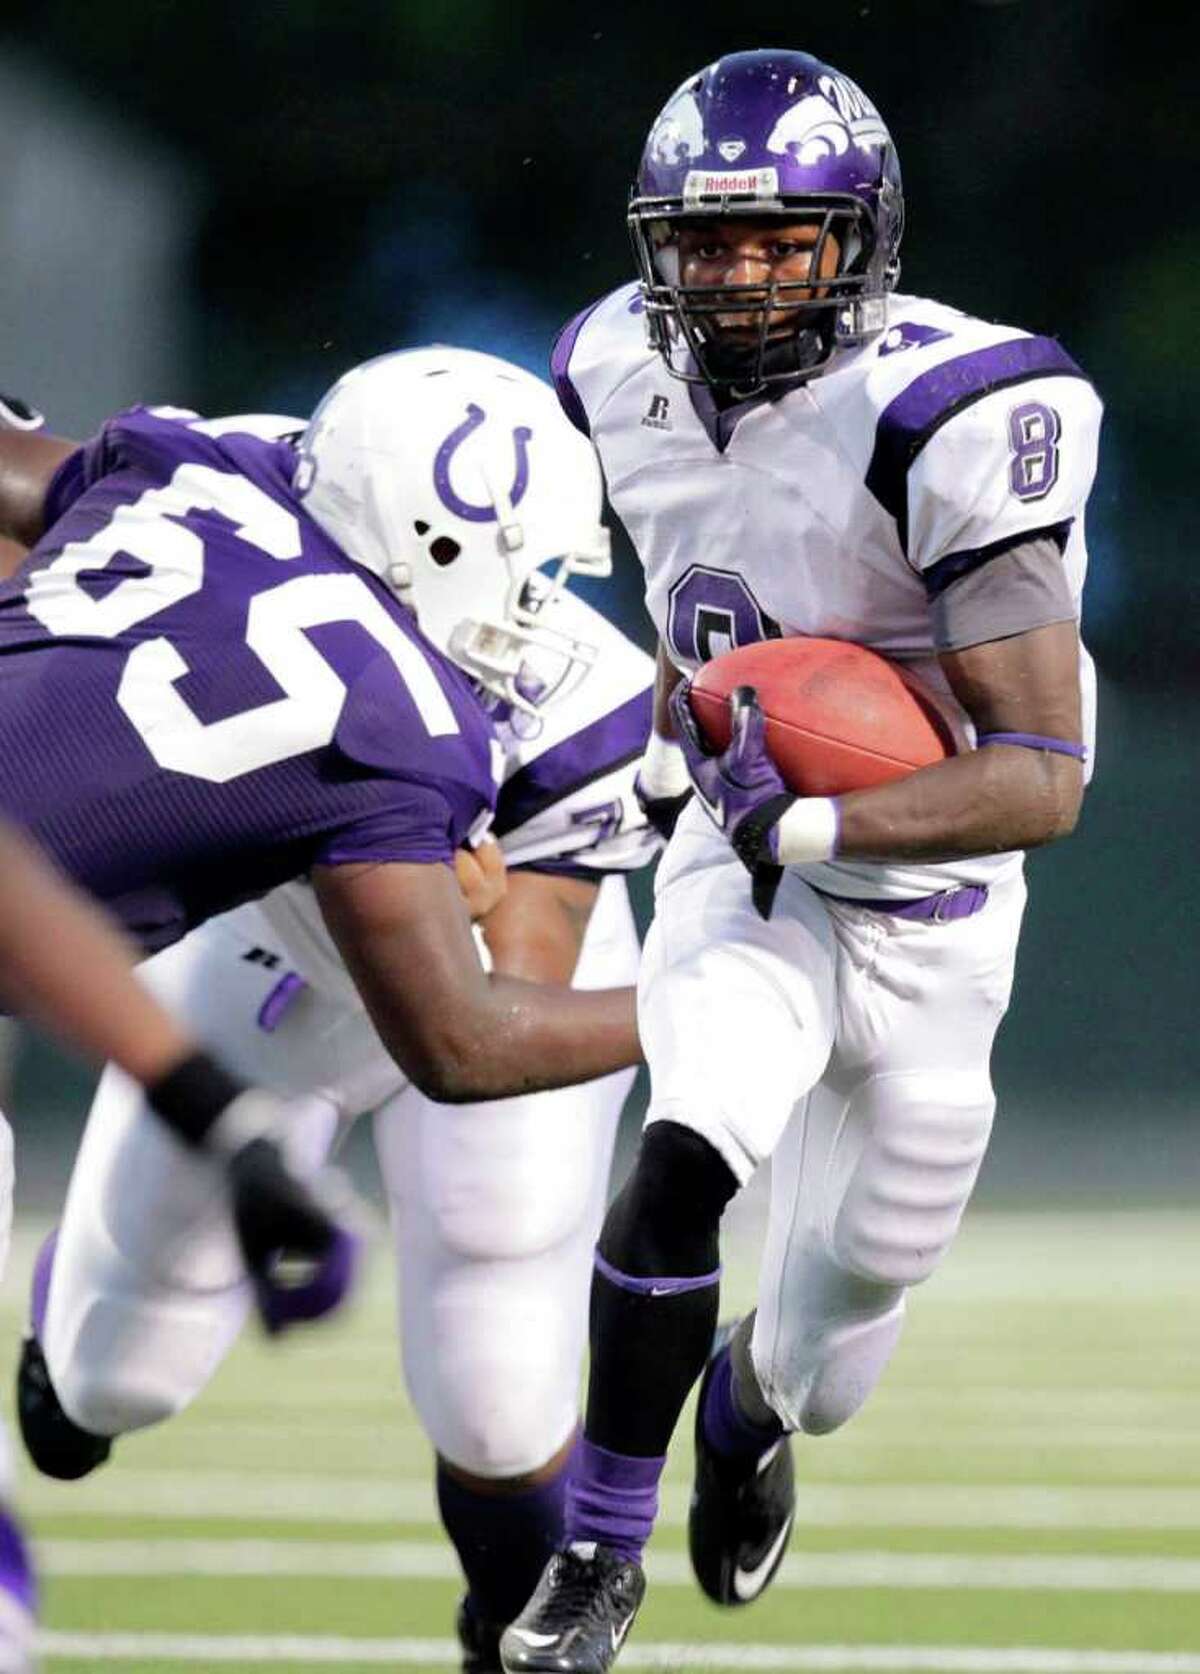 Angleton's Ryan Jackson moves the ball upfield in the first half of a high school football game between Angleton and Dayton at Bronco Stadium on Friday, Sept. 10, 2010, in Dayton. ( Julio Cortez / Houston Chronicle )